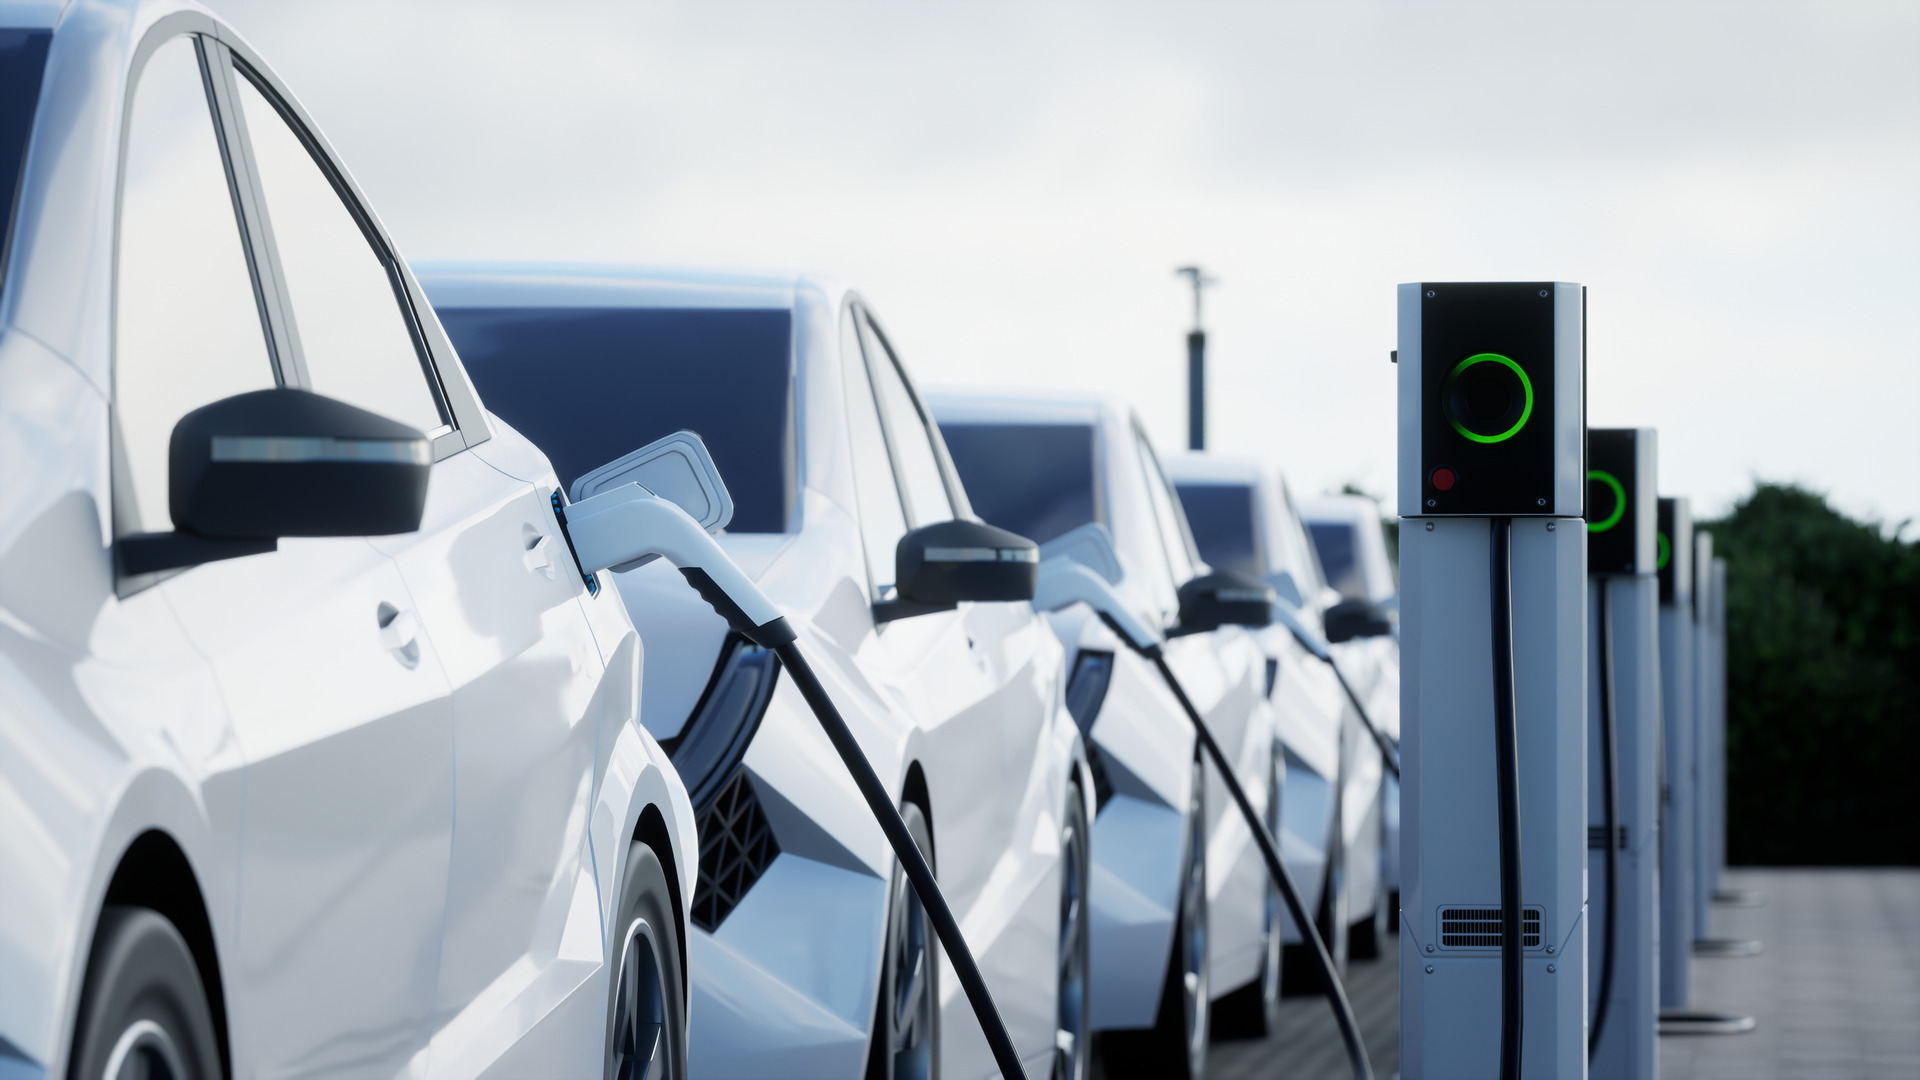 World-first: EVs give power back to grid during outage in Australia